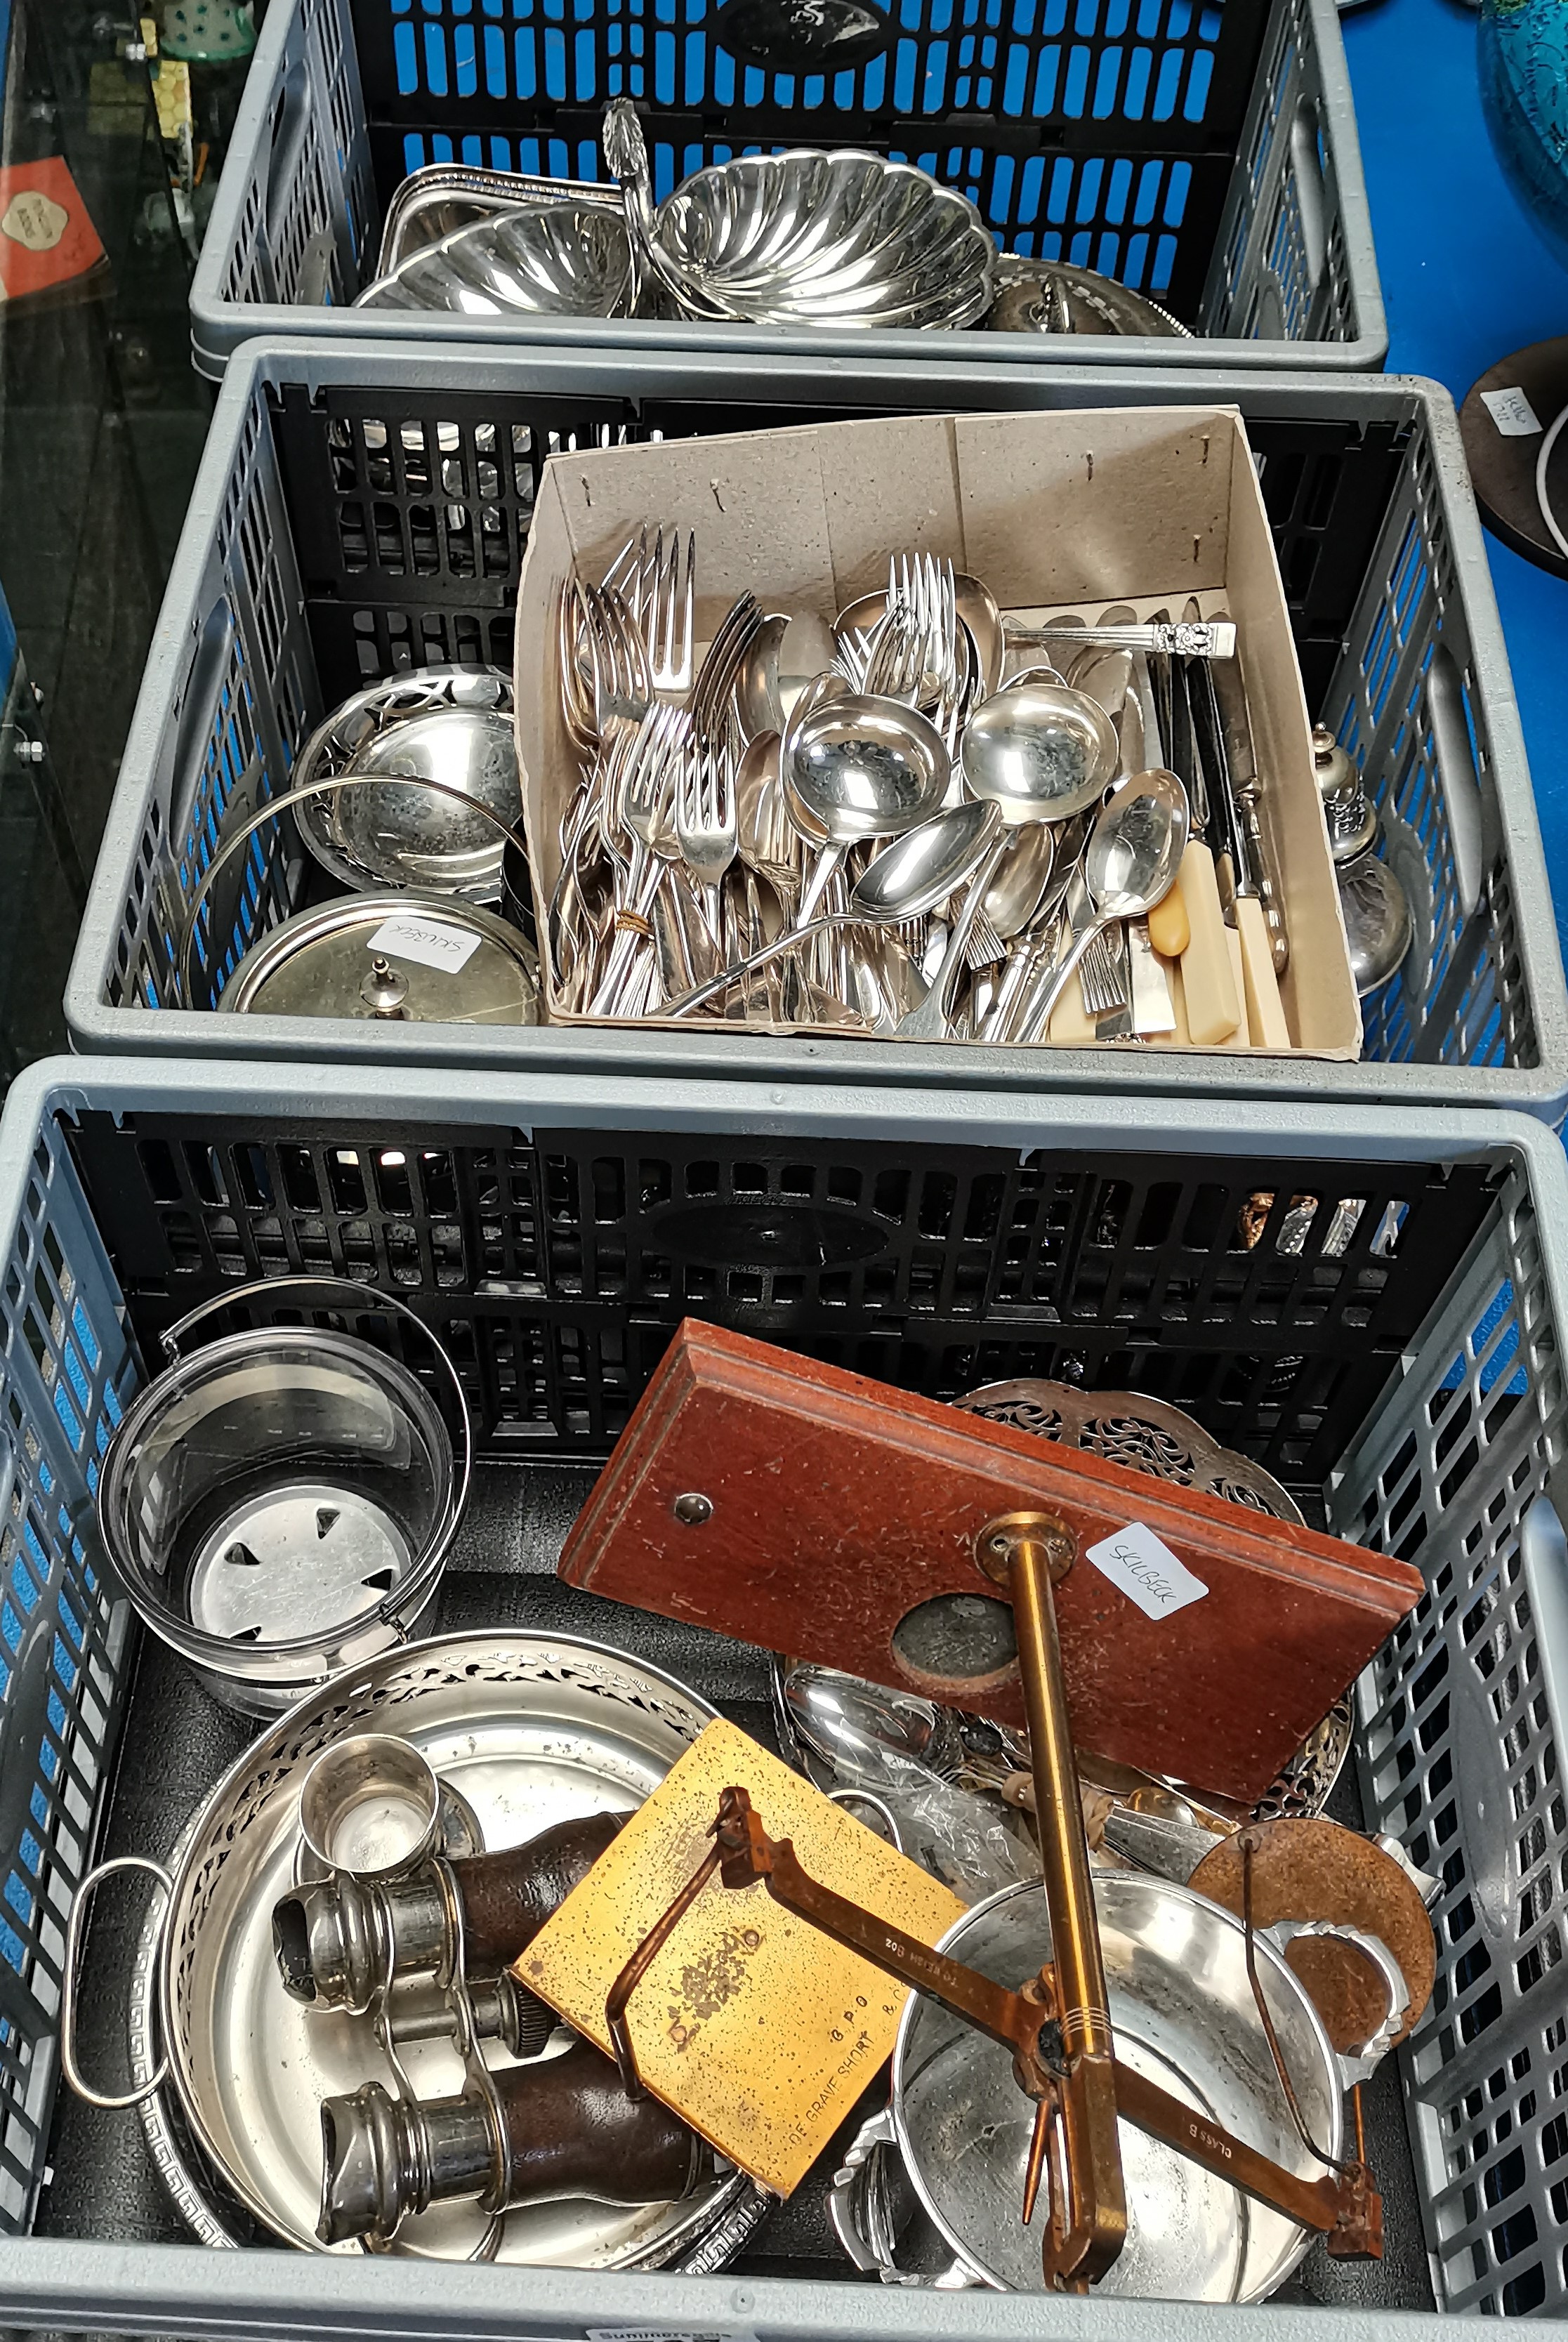 4 x boxes plated ware - cutlery, dishes etc